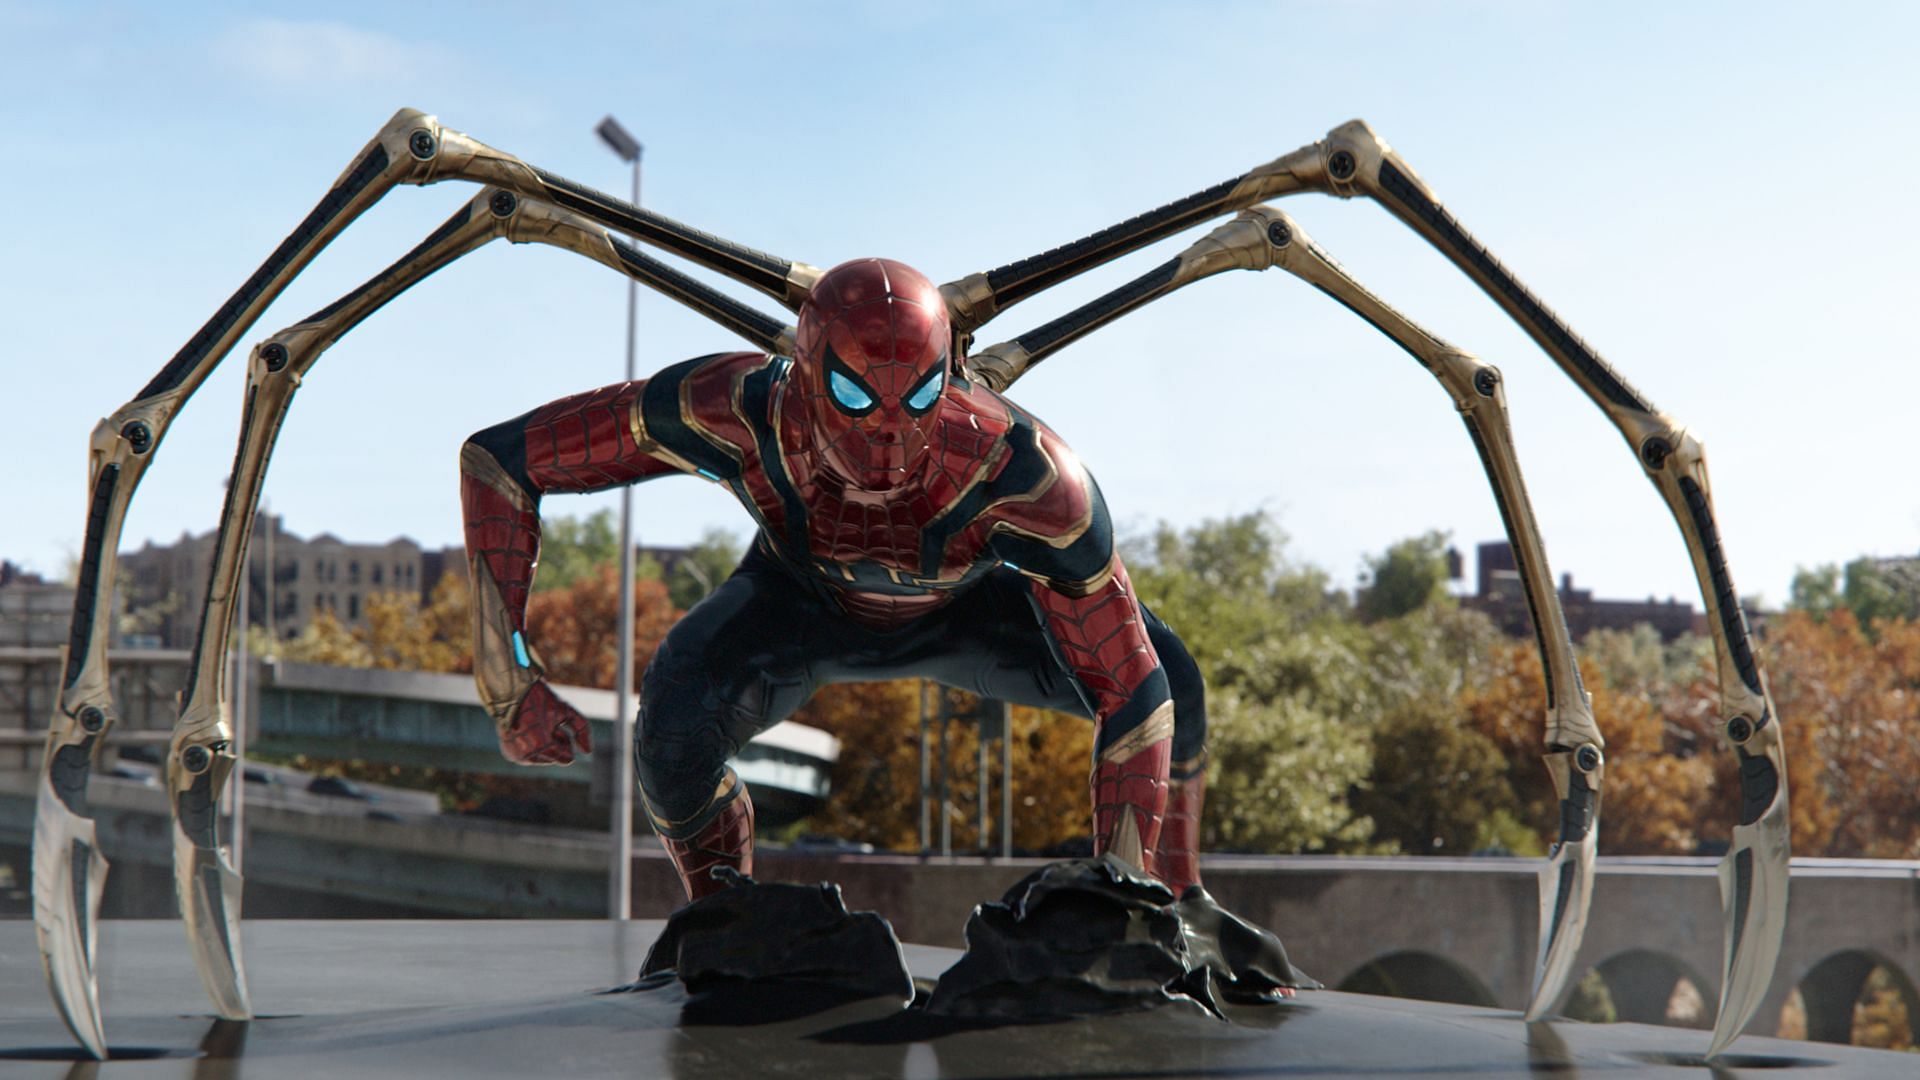 Spider-Man in his Iron Spider suit in Spider-Man: No Way Home (Image Credit: Sony Pictures/Marvel Studios)